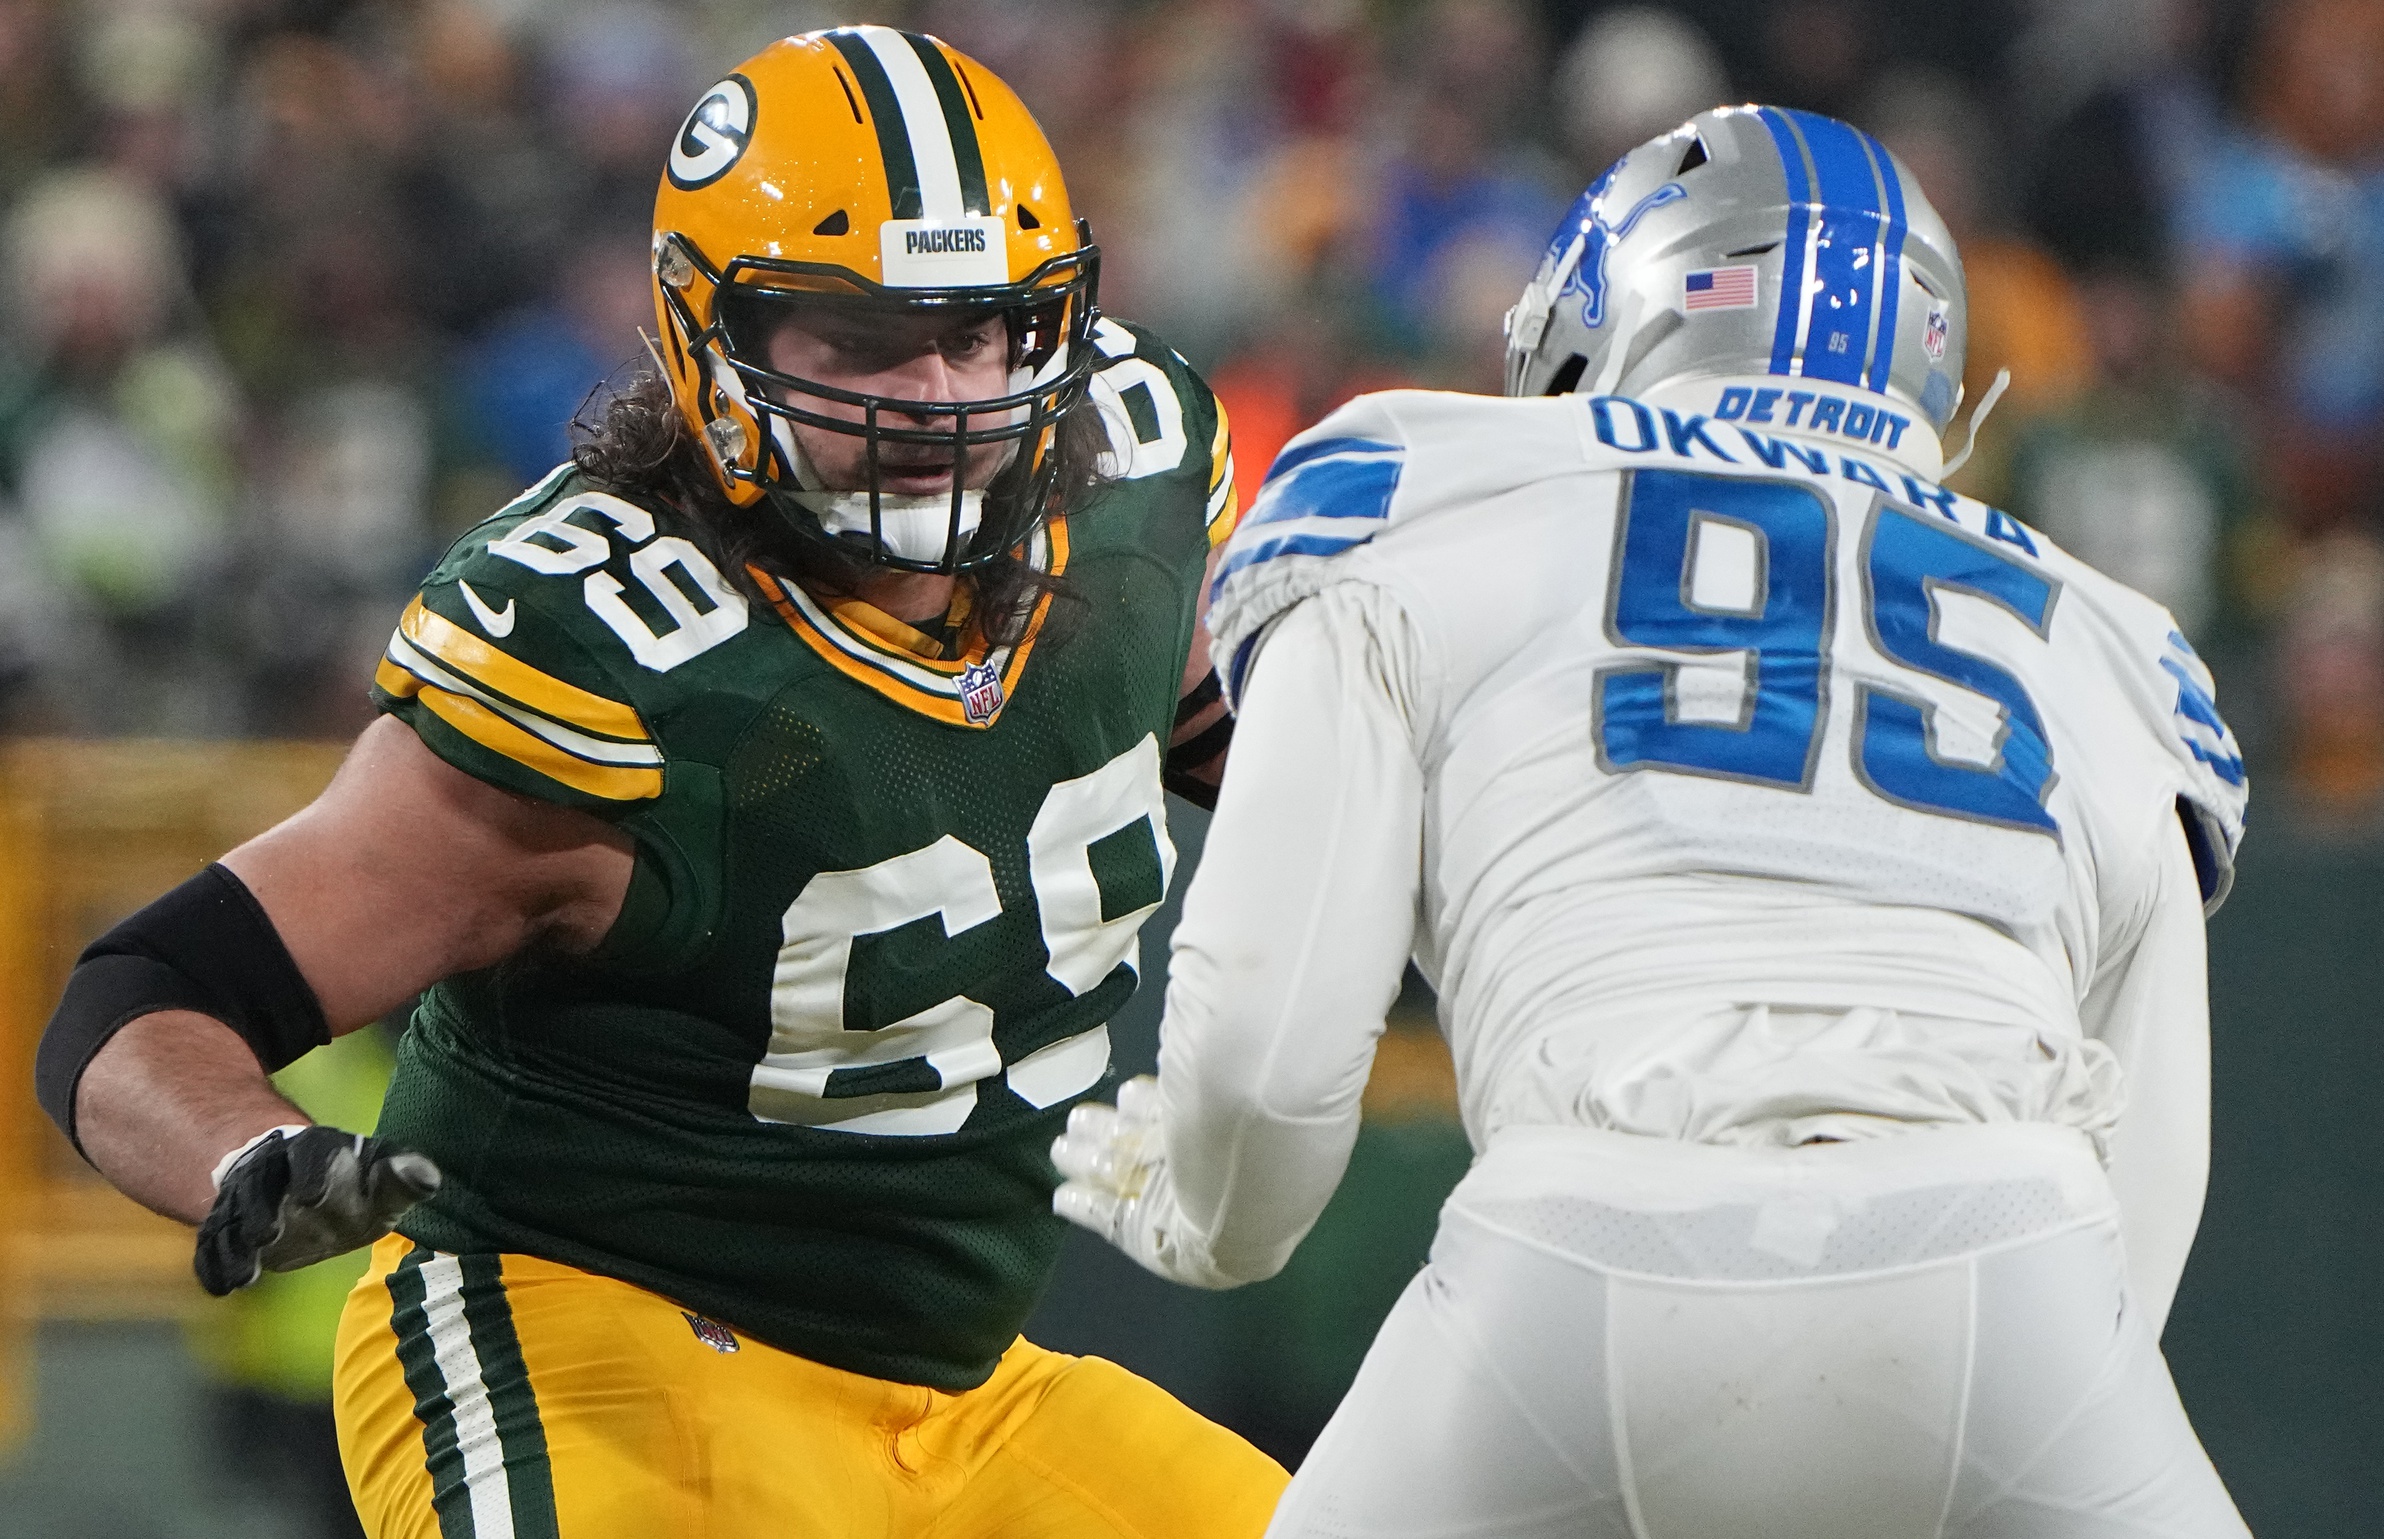 Jan 8, 2023; Green Bay, Wisconsin, USA; Green Bay Packers offensive tackle David Bakhtiari (69) provides pass protection while covering Detroit Lions linebacker Romeo Okwara (95) during the second quarter at Lambeau Field. Mandatory Credit: Mark Hoffman/Milwaukee Journal Sentinel via USA TODAY NETWORK (NFL News)